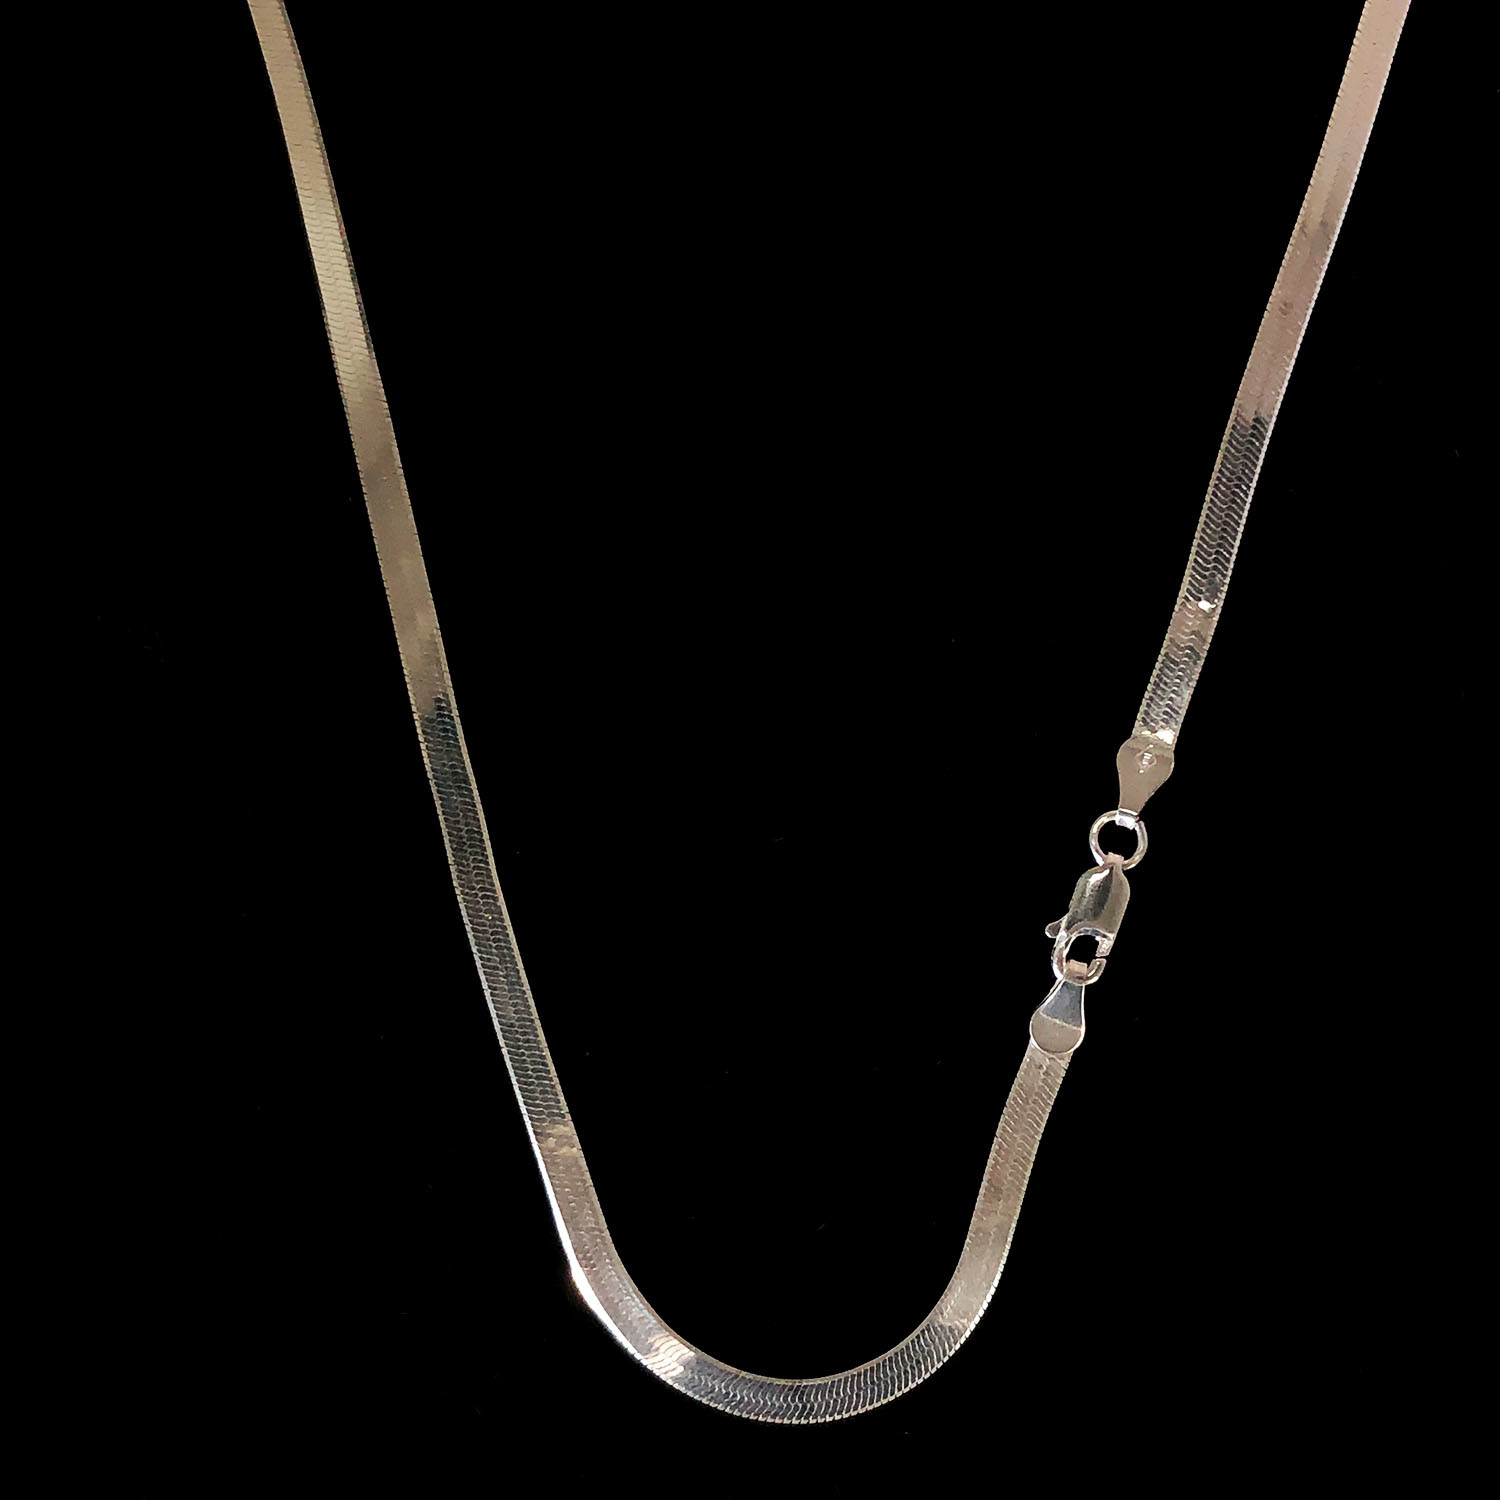 Solid Sterling Silver Herringbone Chain Necklace // 3mm (16